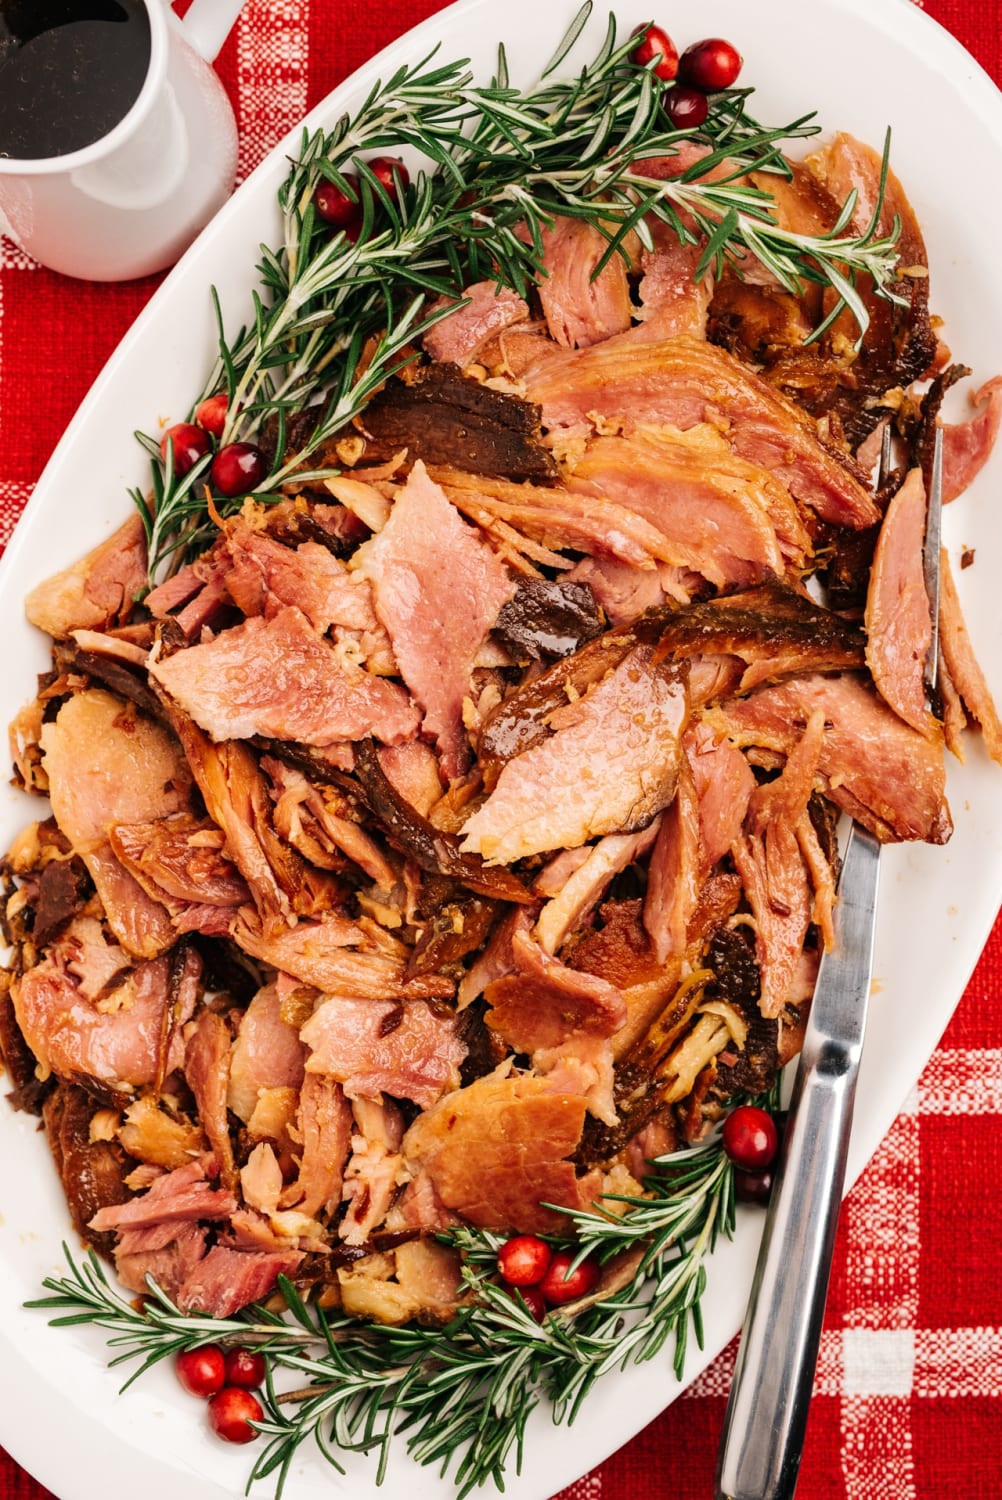 Slow cooker ham is an easy, flavorful meal that's quick to prep.